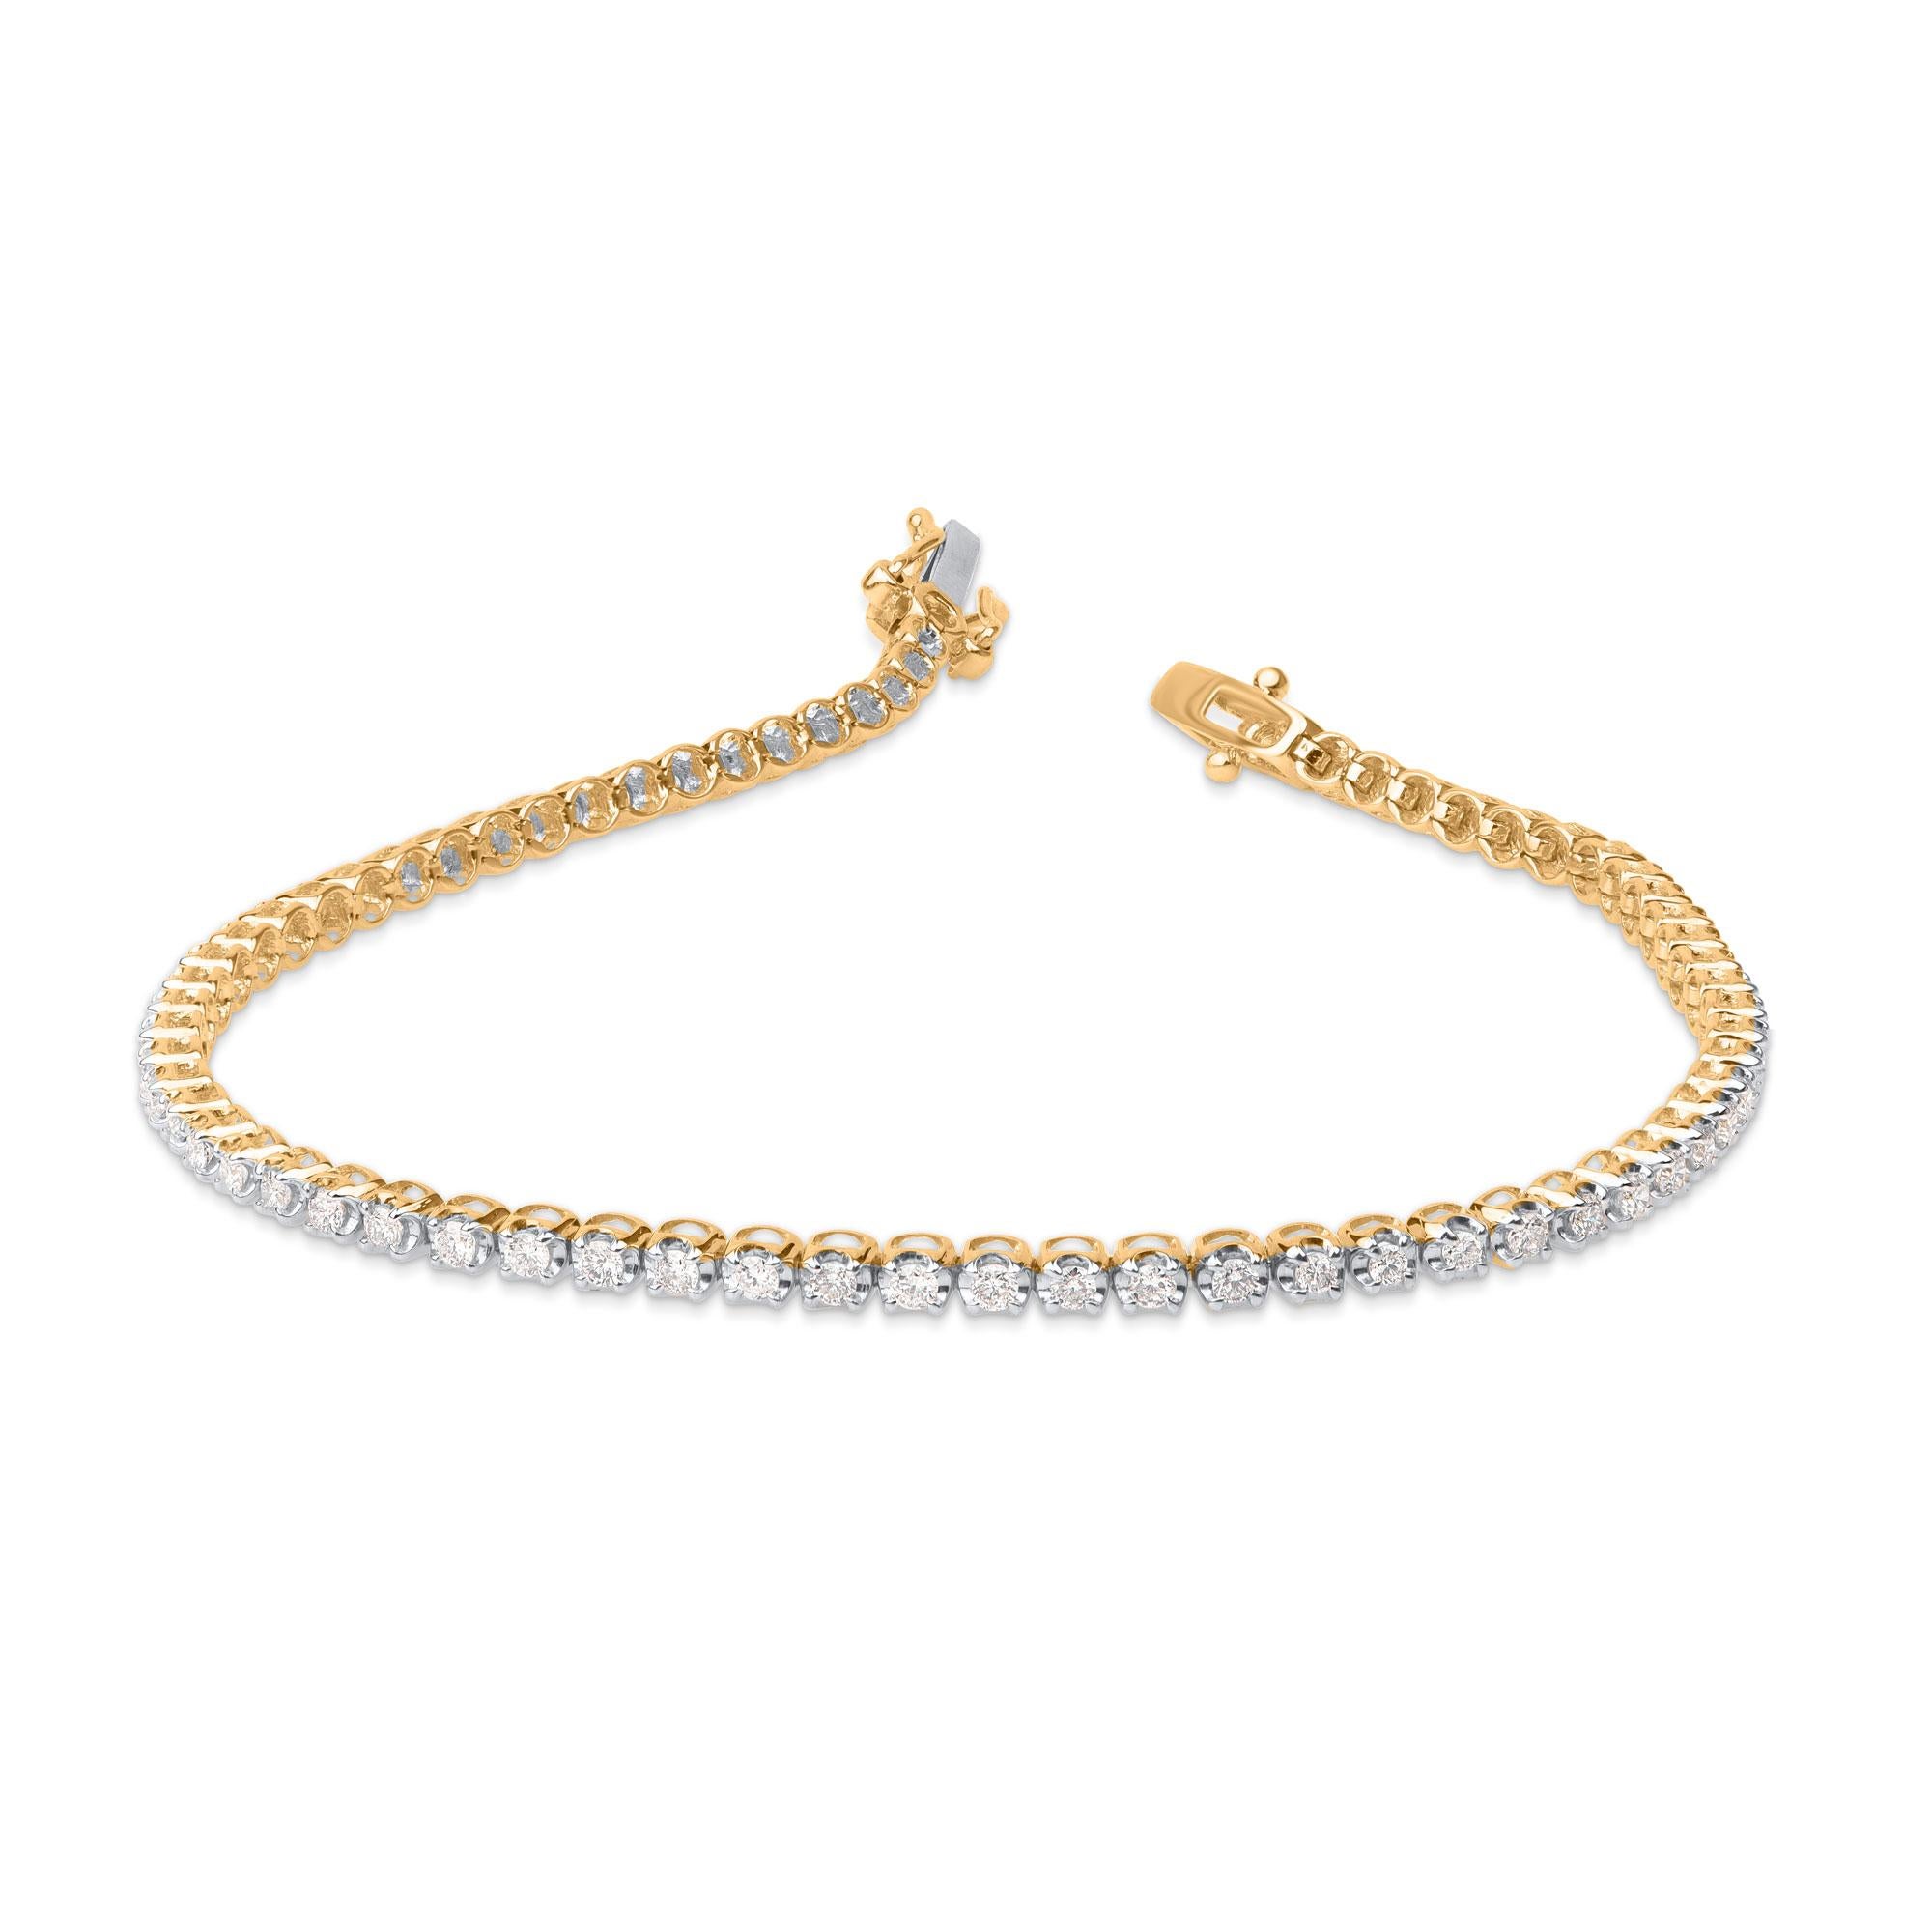 A classic tennis bracelet – perfect accessory for women with everyday attire. Elegantly designed in 10 kt yellow gold and embellished with 72 brilliant natural diamonds in prong setting. Diamonds are graded H-I Color, I2 Clarity. 
